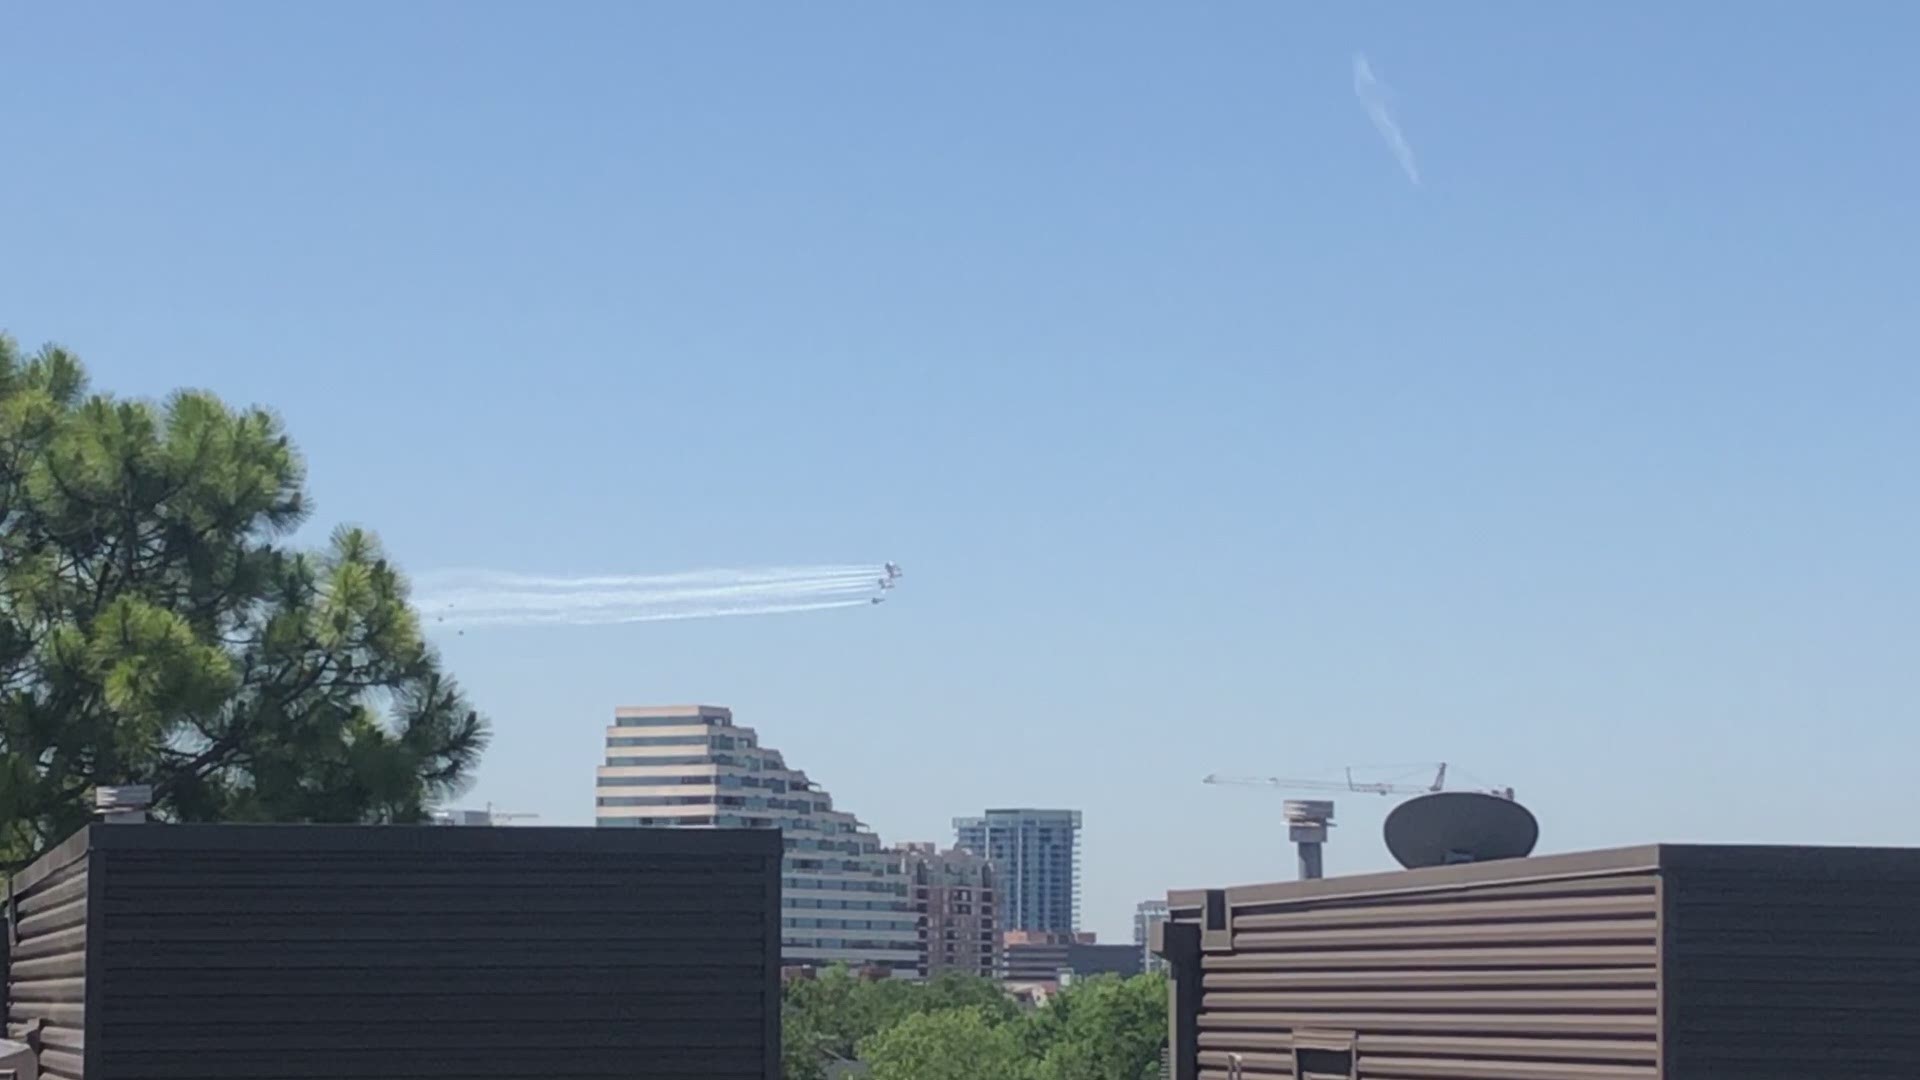 Julia Reece captured cell phone video of the U.S. Navy's Blue Angels flying over downtown Dallas on Wednesday.